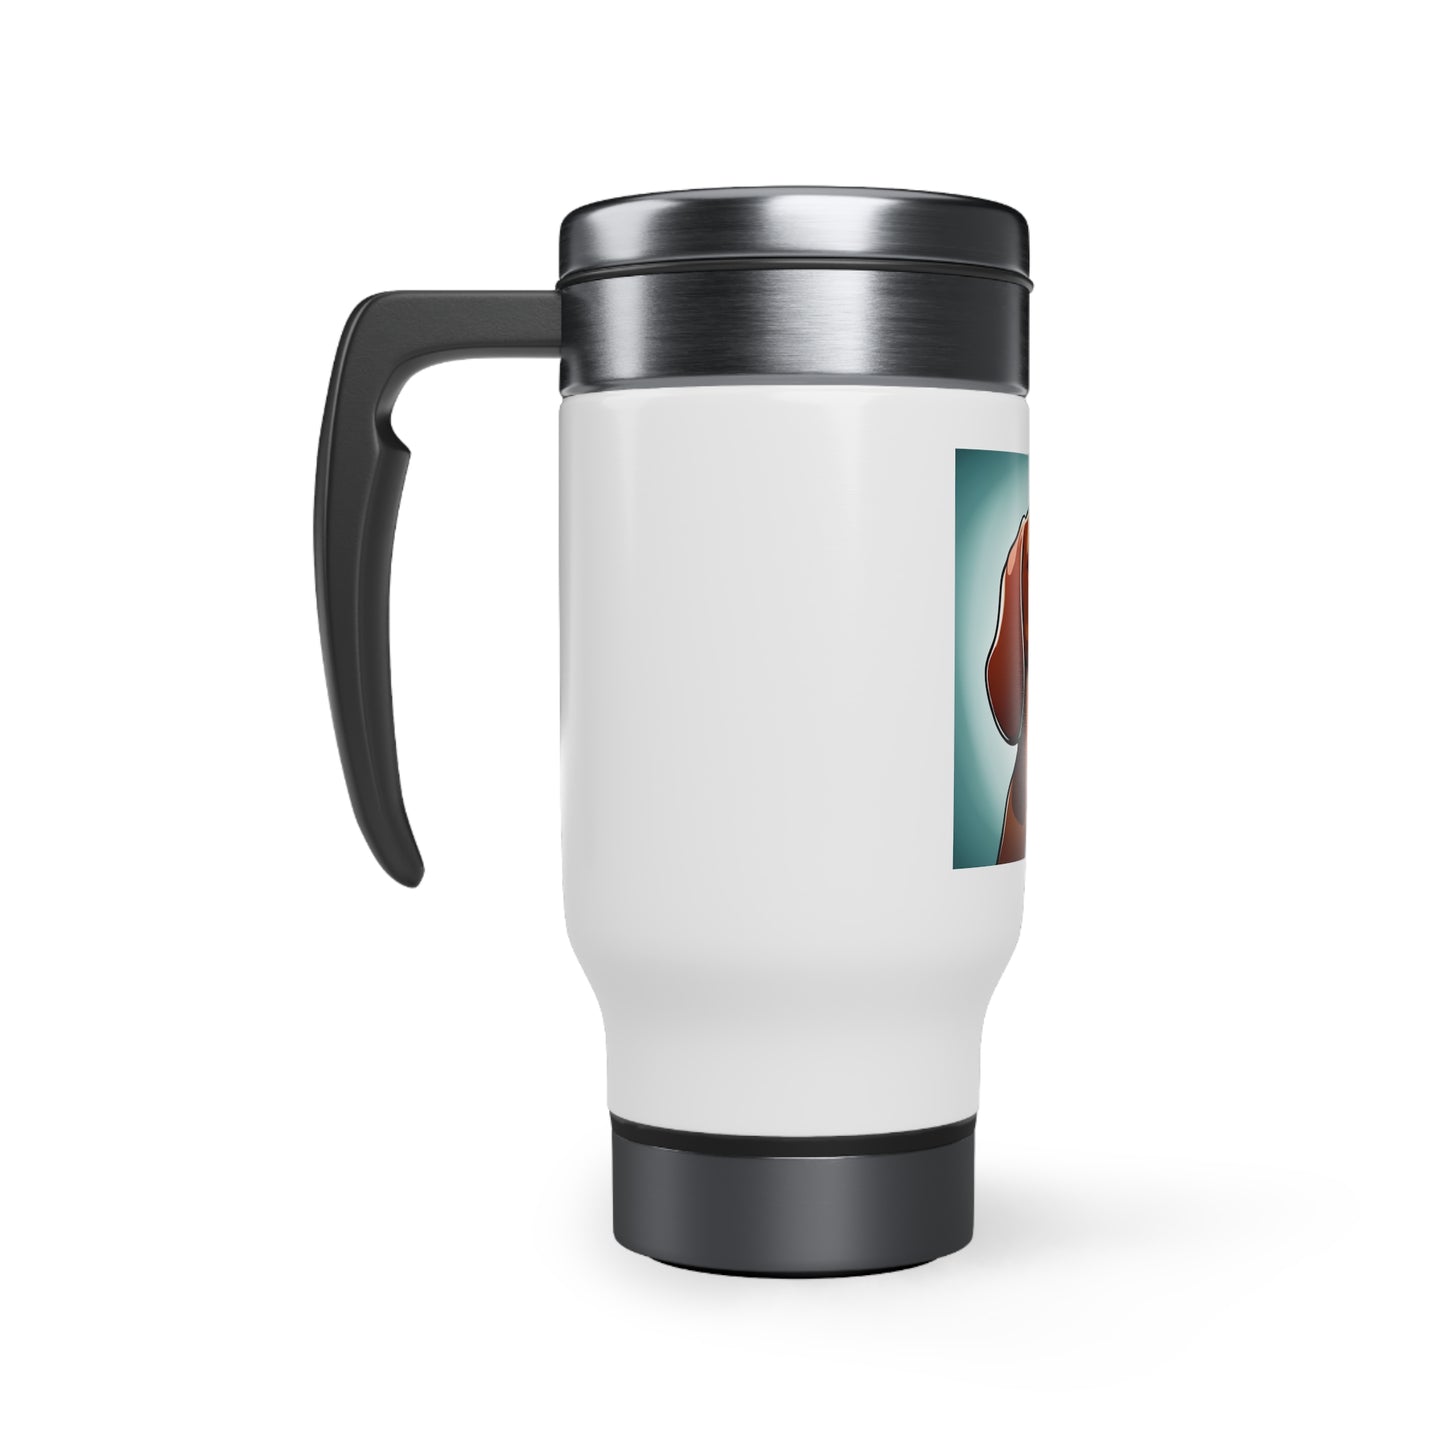 Rusty Gear Stainless Steel Travel Mug with Handle, 14oz